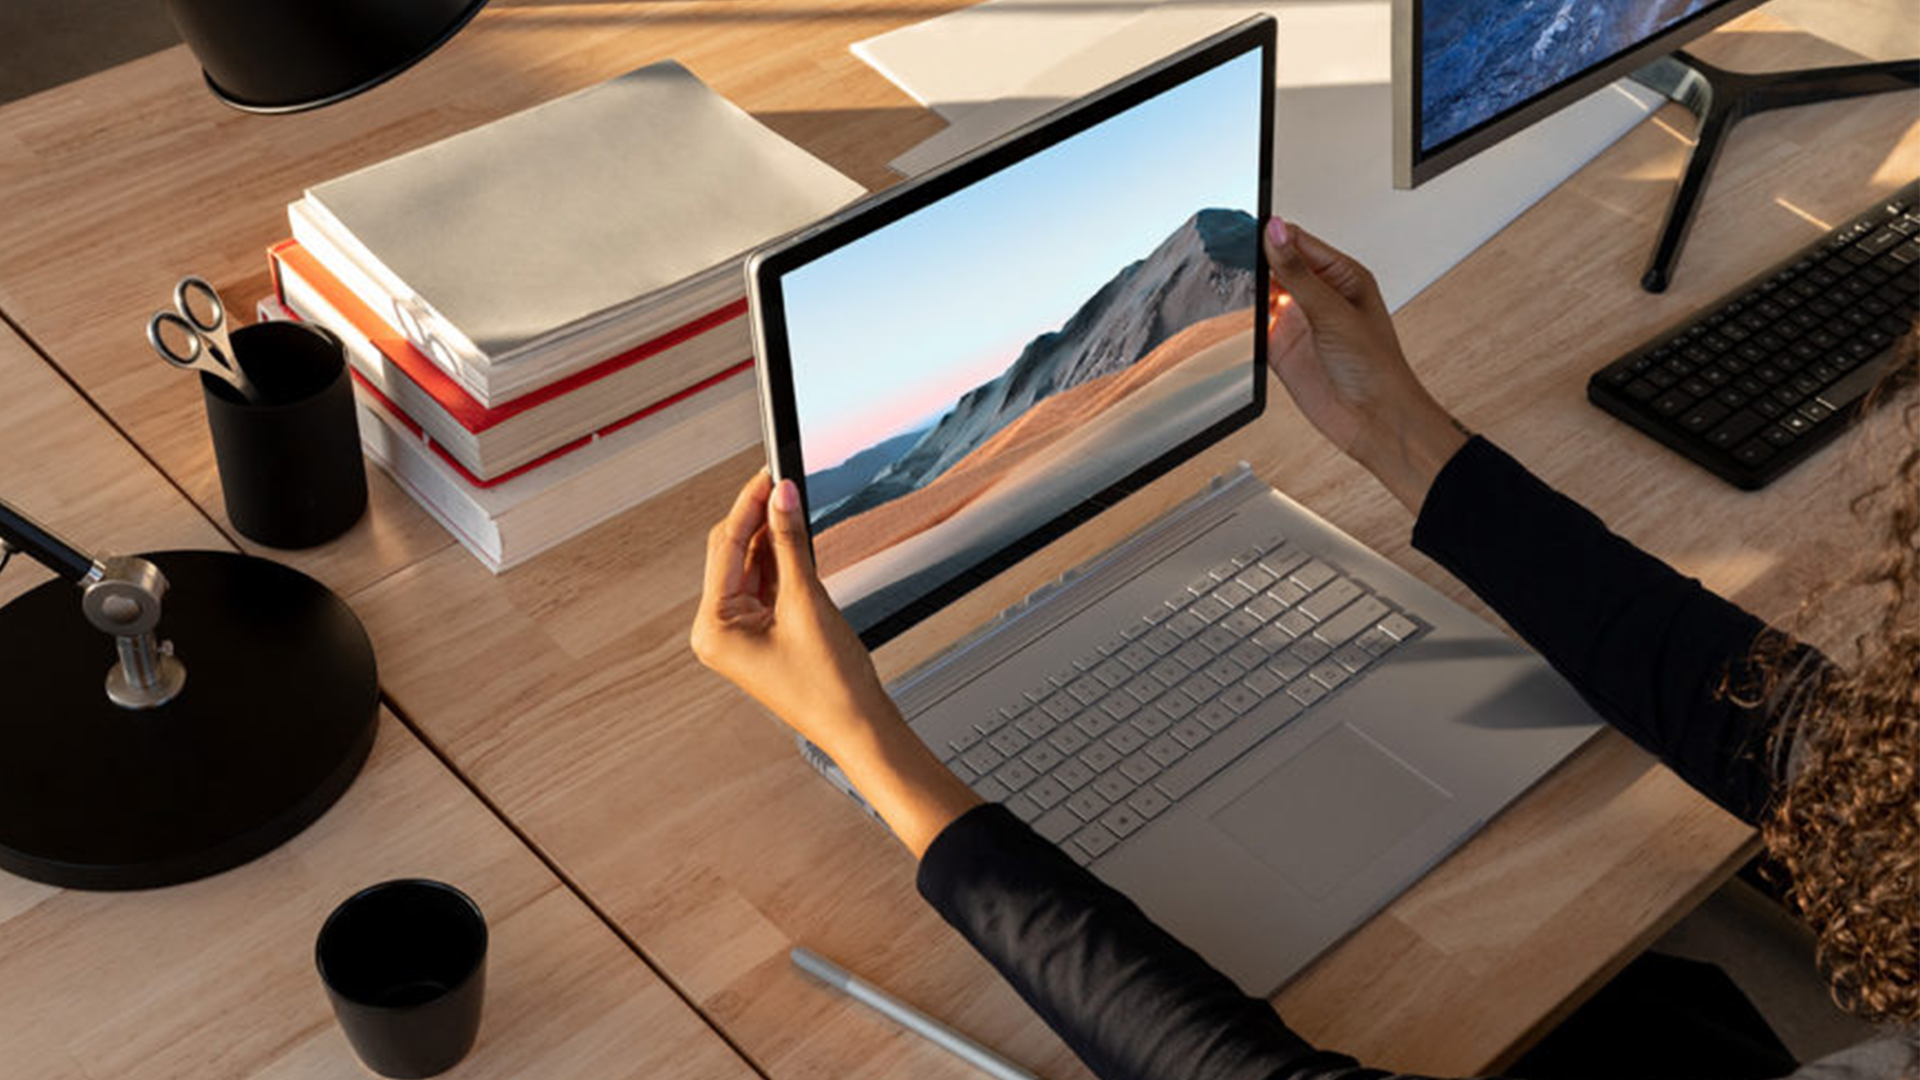 Microsoft Surface Go 2, Surface Book 3 Laptops Launched in India: Price, Specs